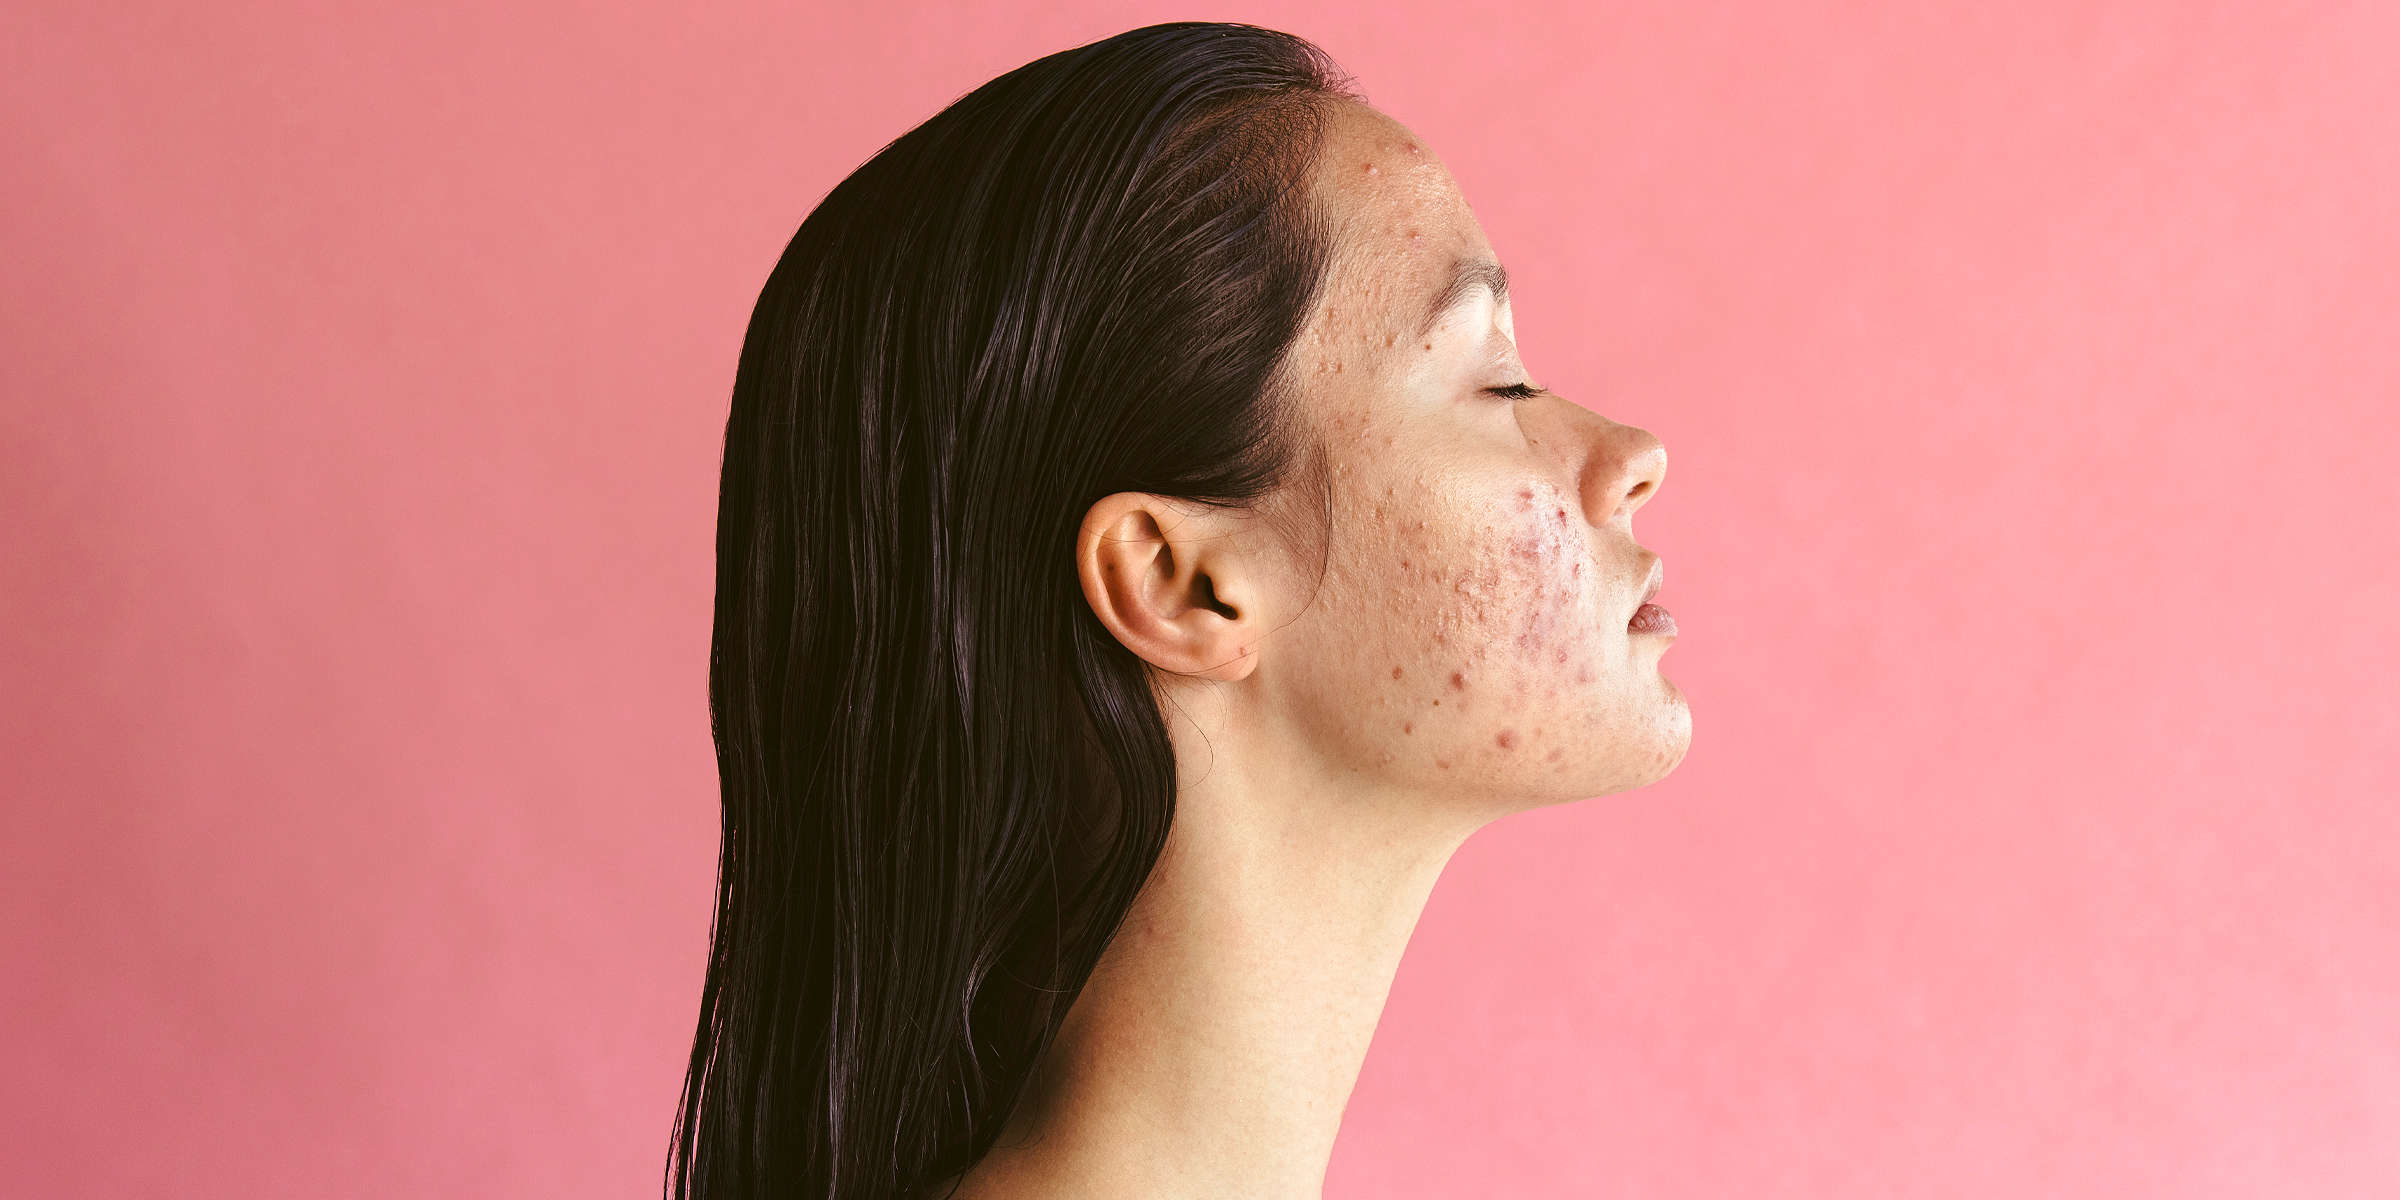 A model with a bad outbreak of acne. | Source: Shutterstock